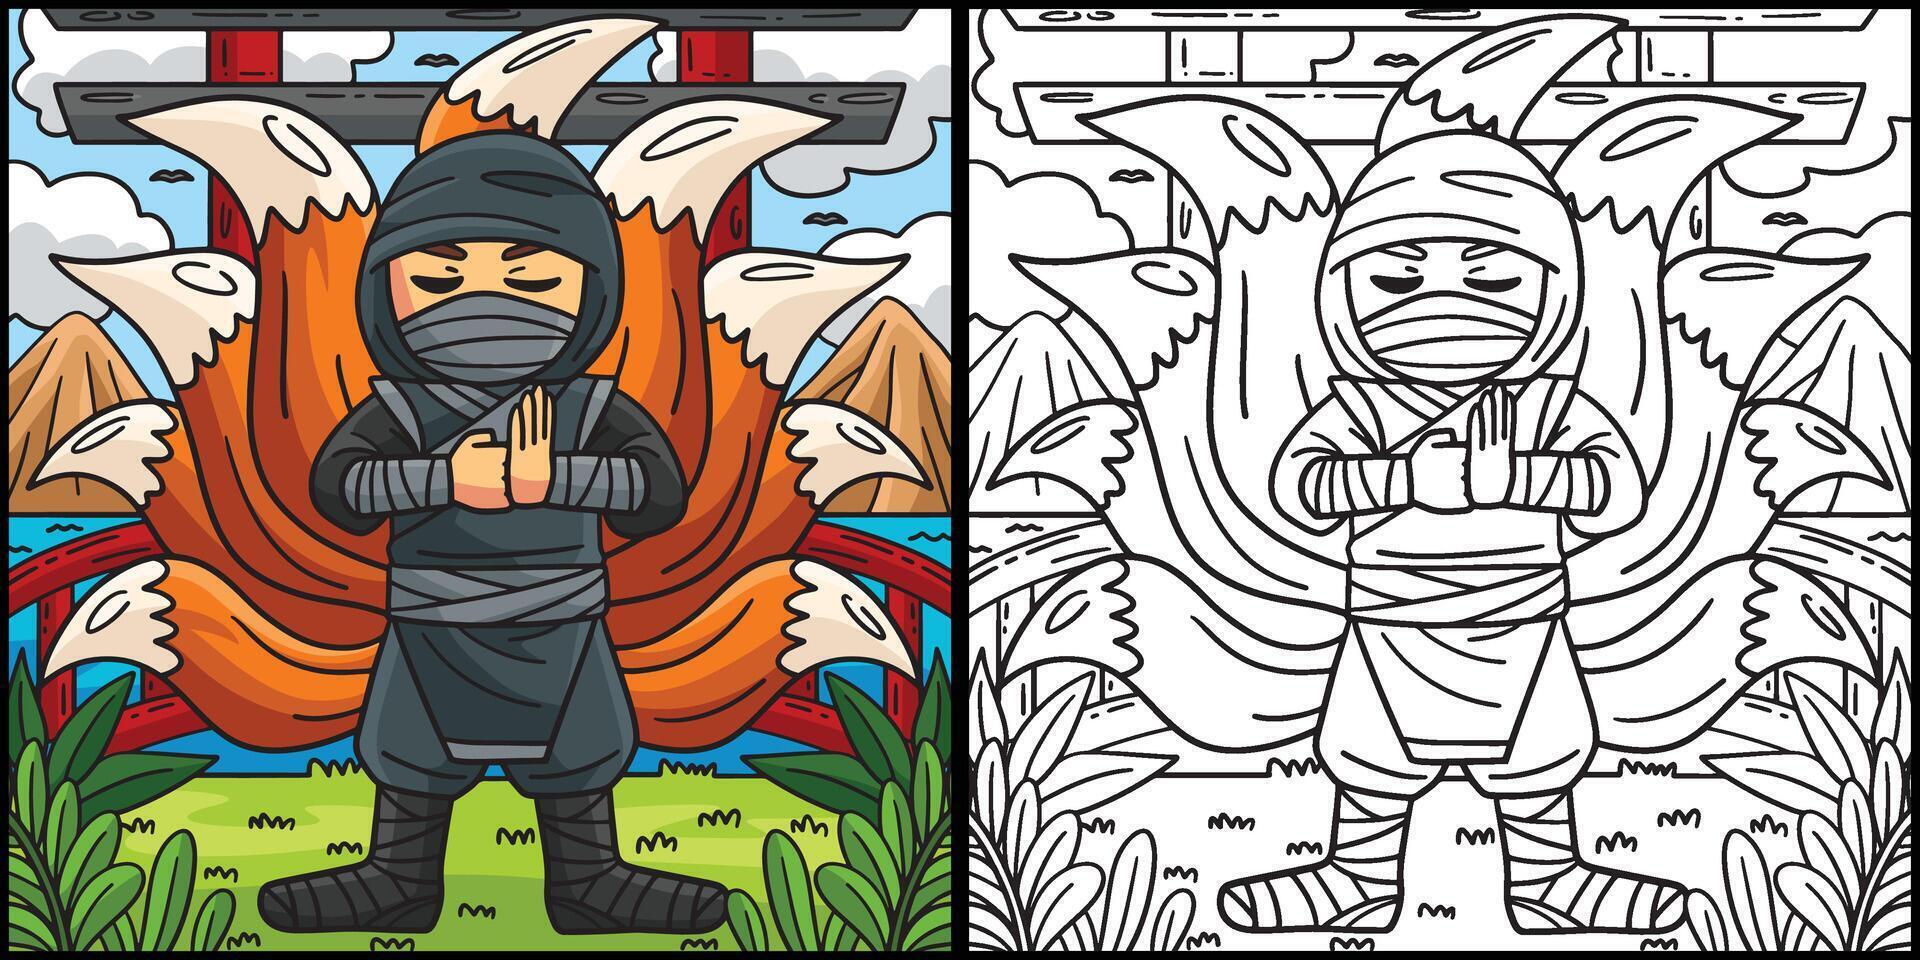 Ninja with Nine Tails Coloring Page Illustration vector